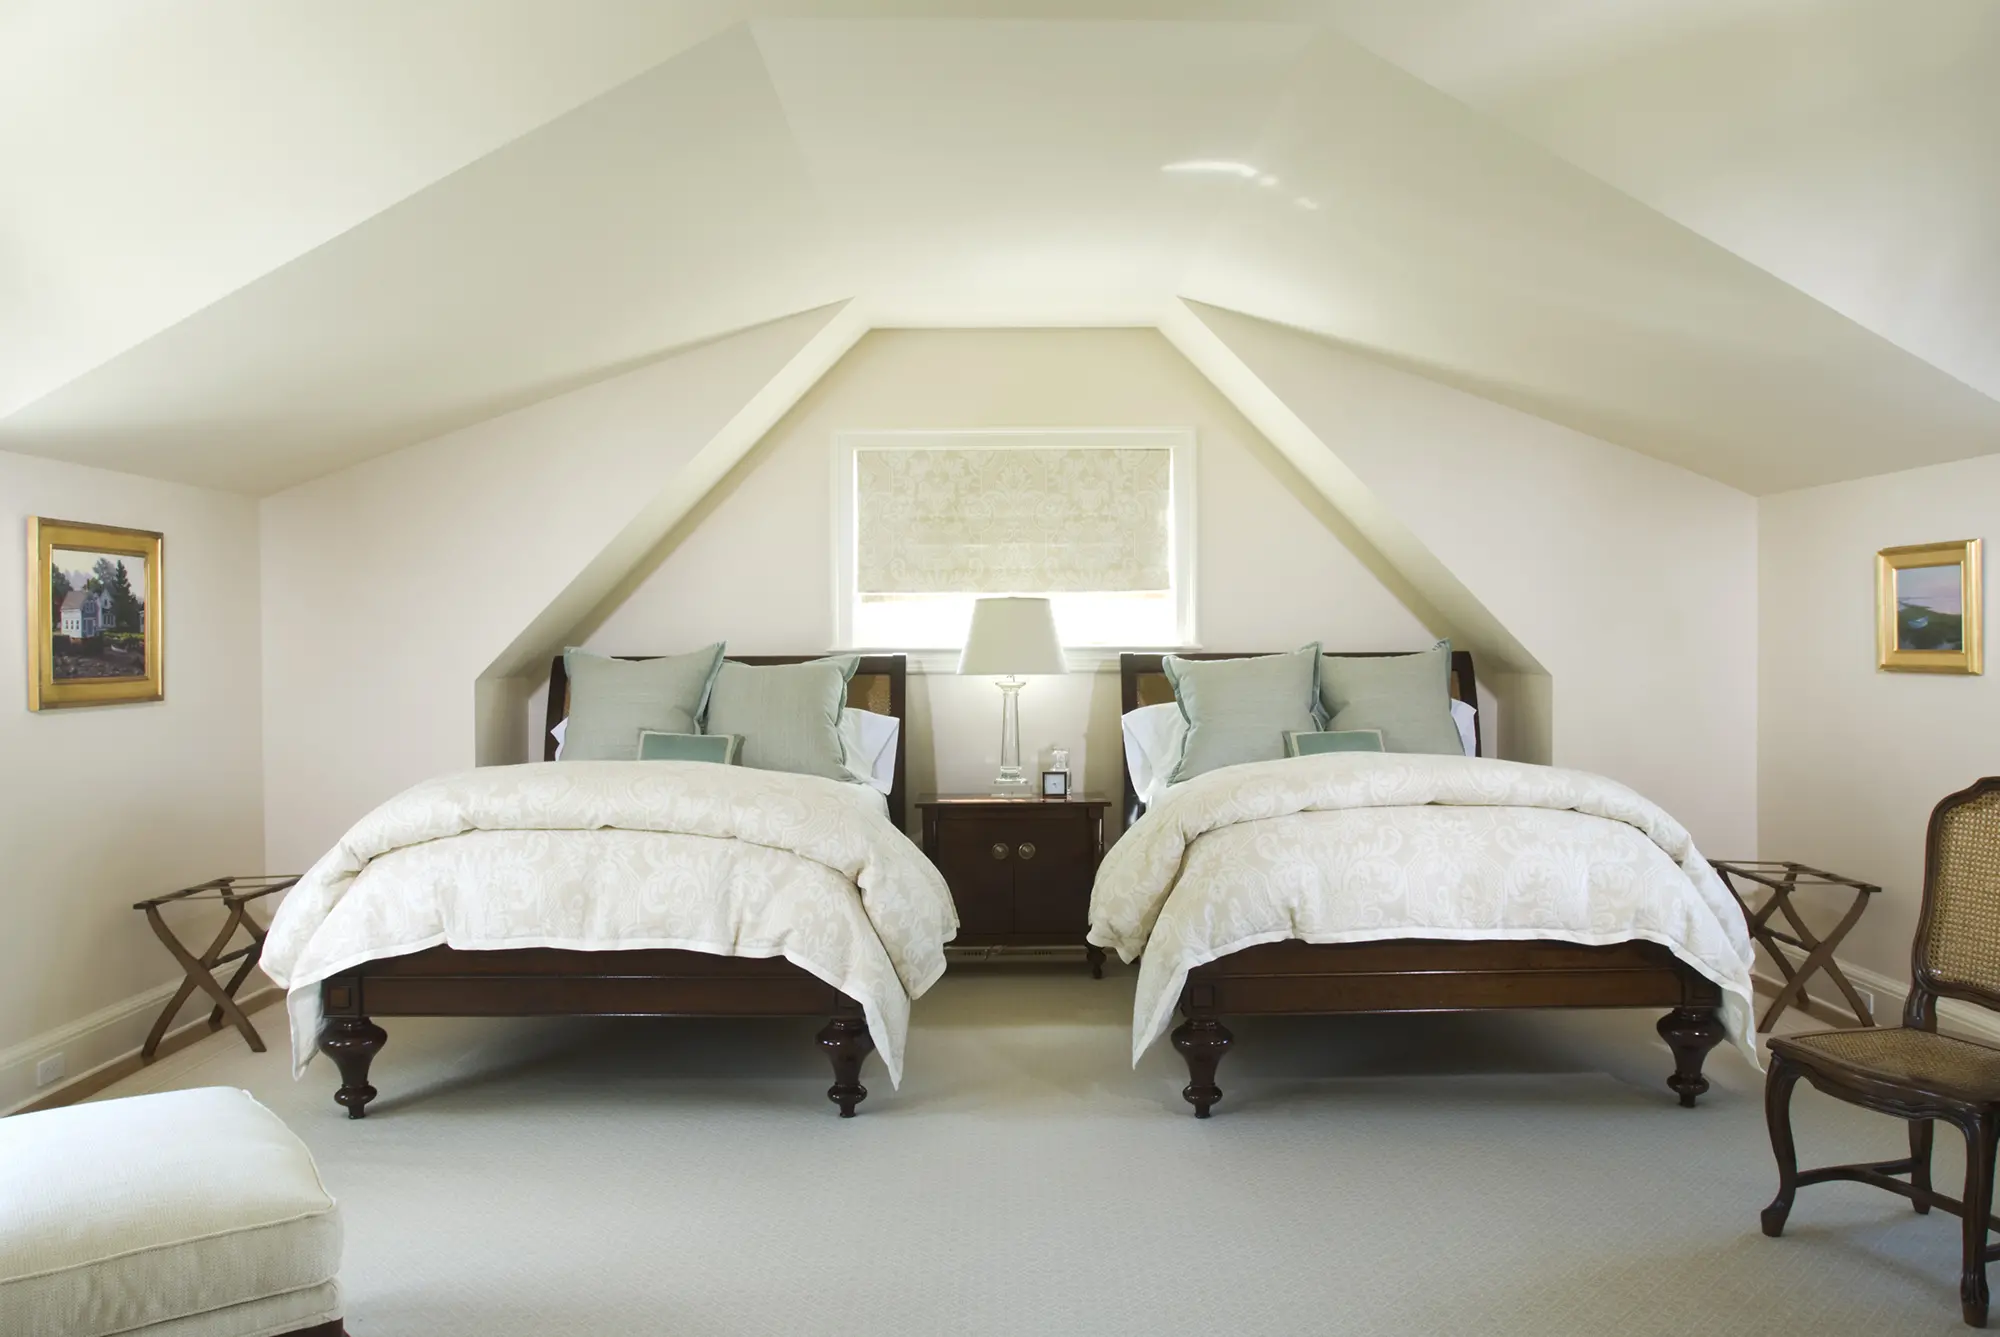 Guest bedroom with slanted ceilings